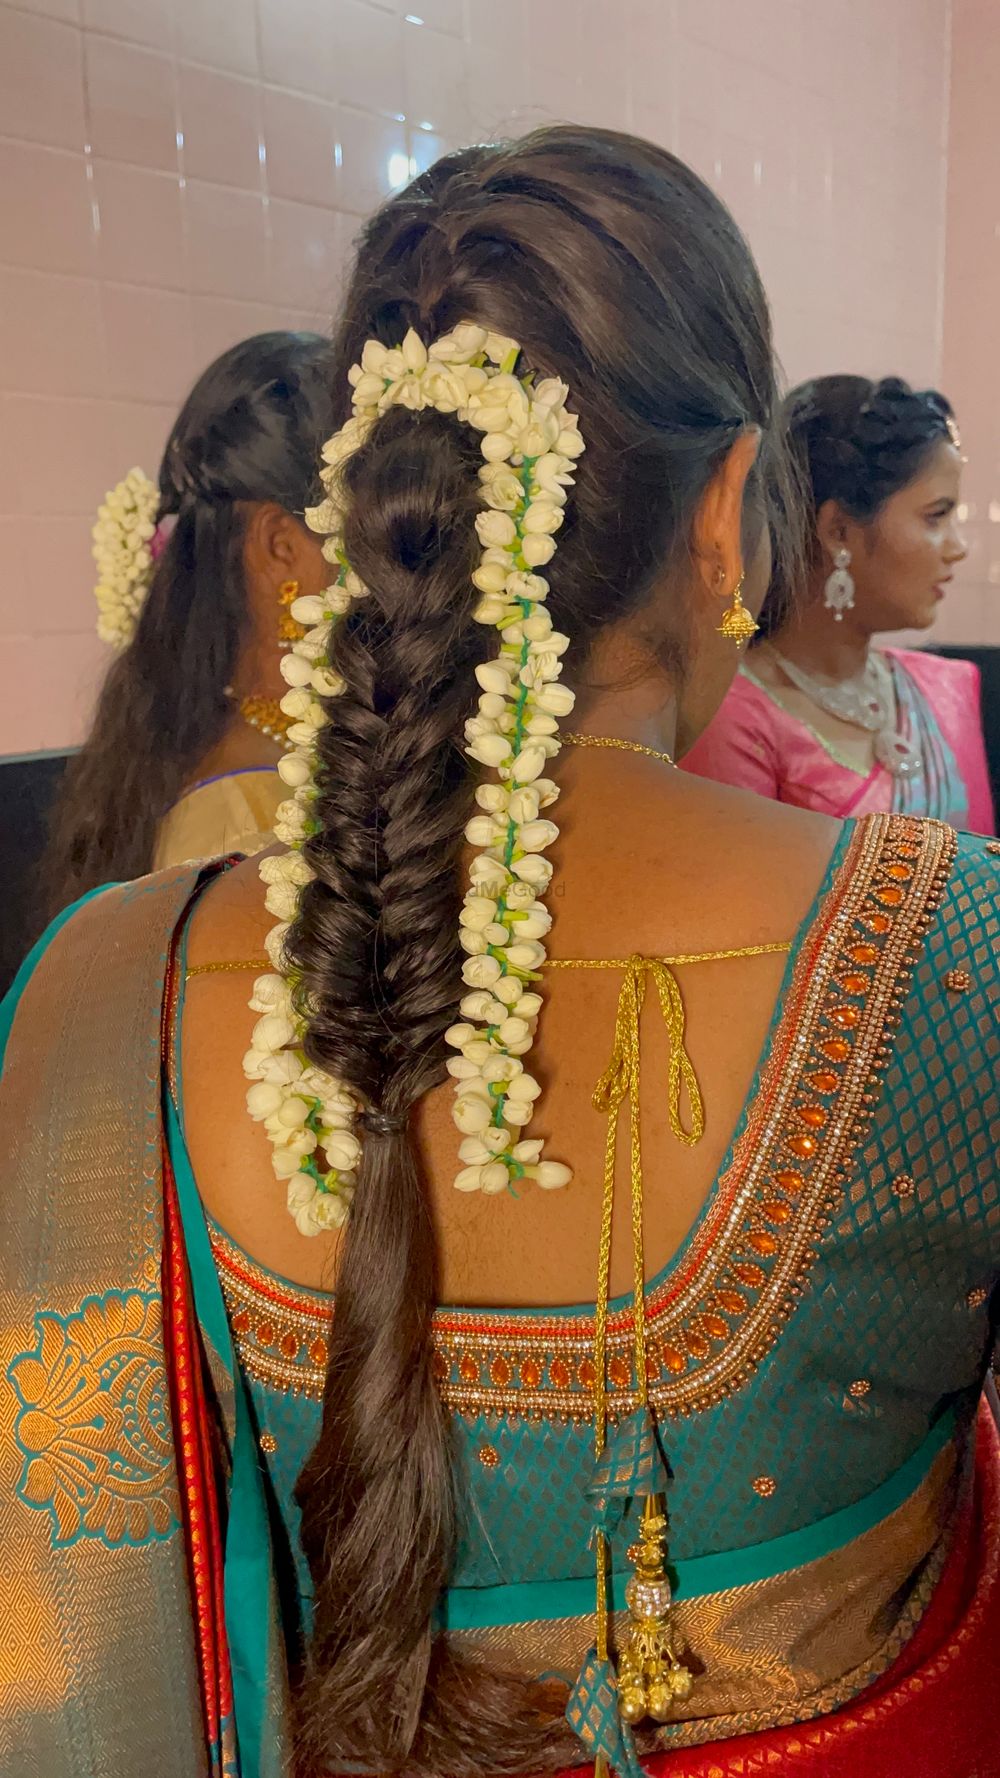 Photo From Bride'smaid Makeover - By Priya's Bridal Makeover